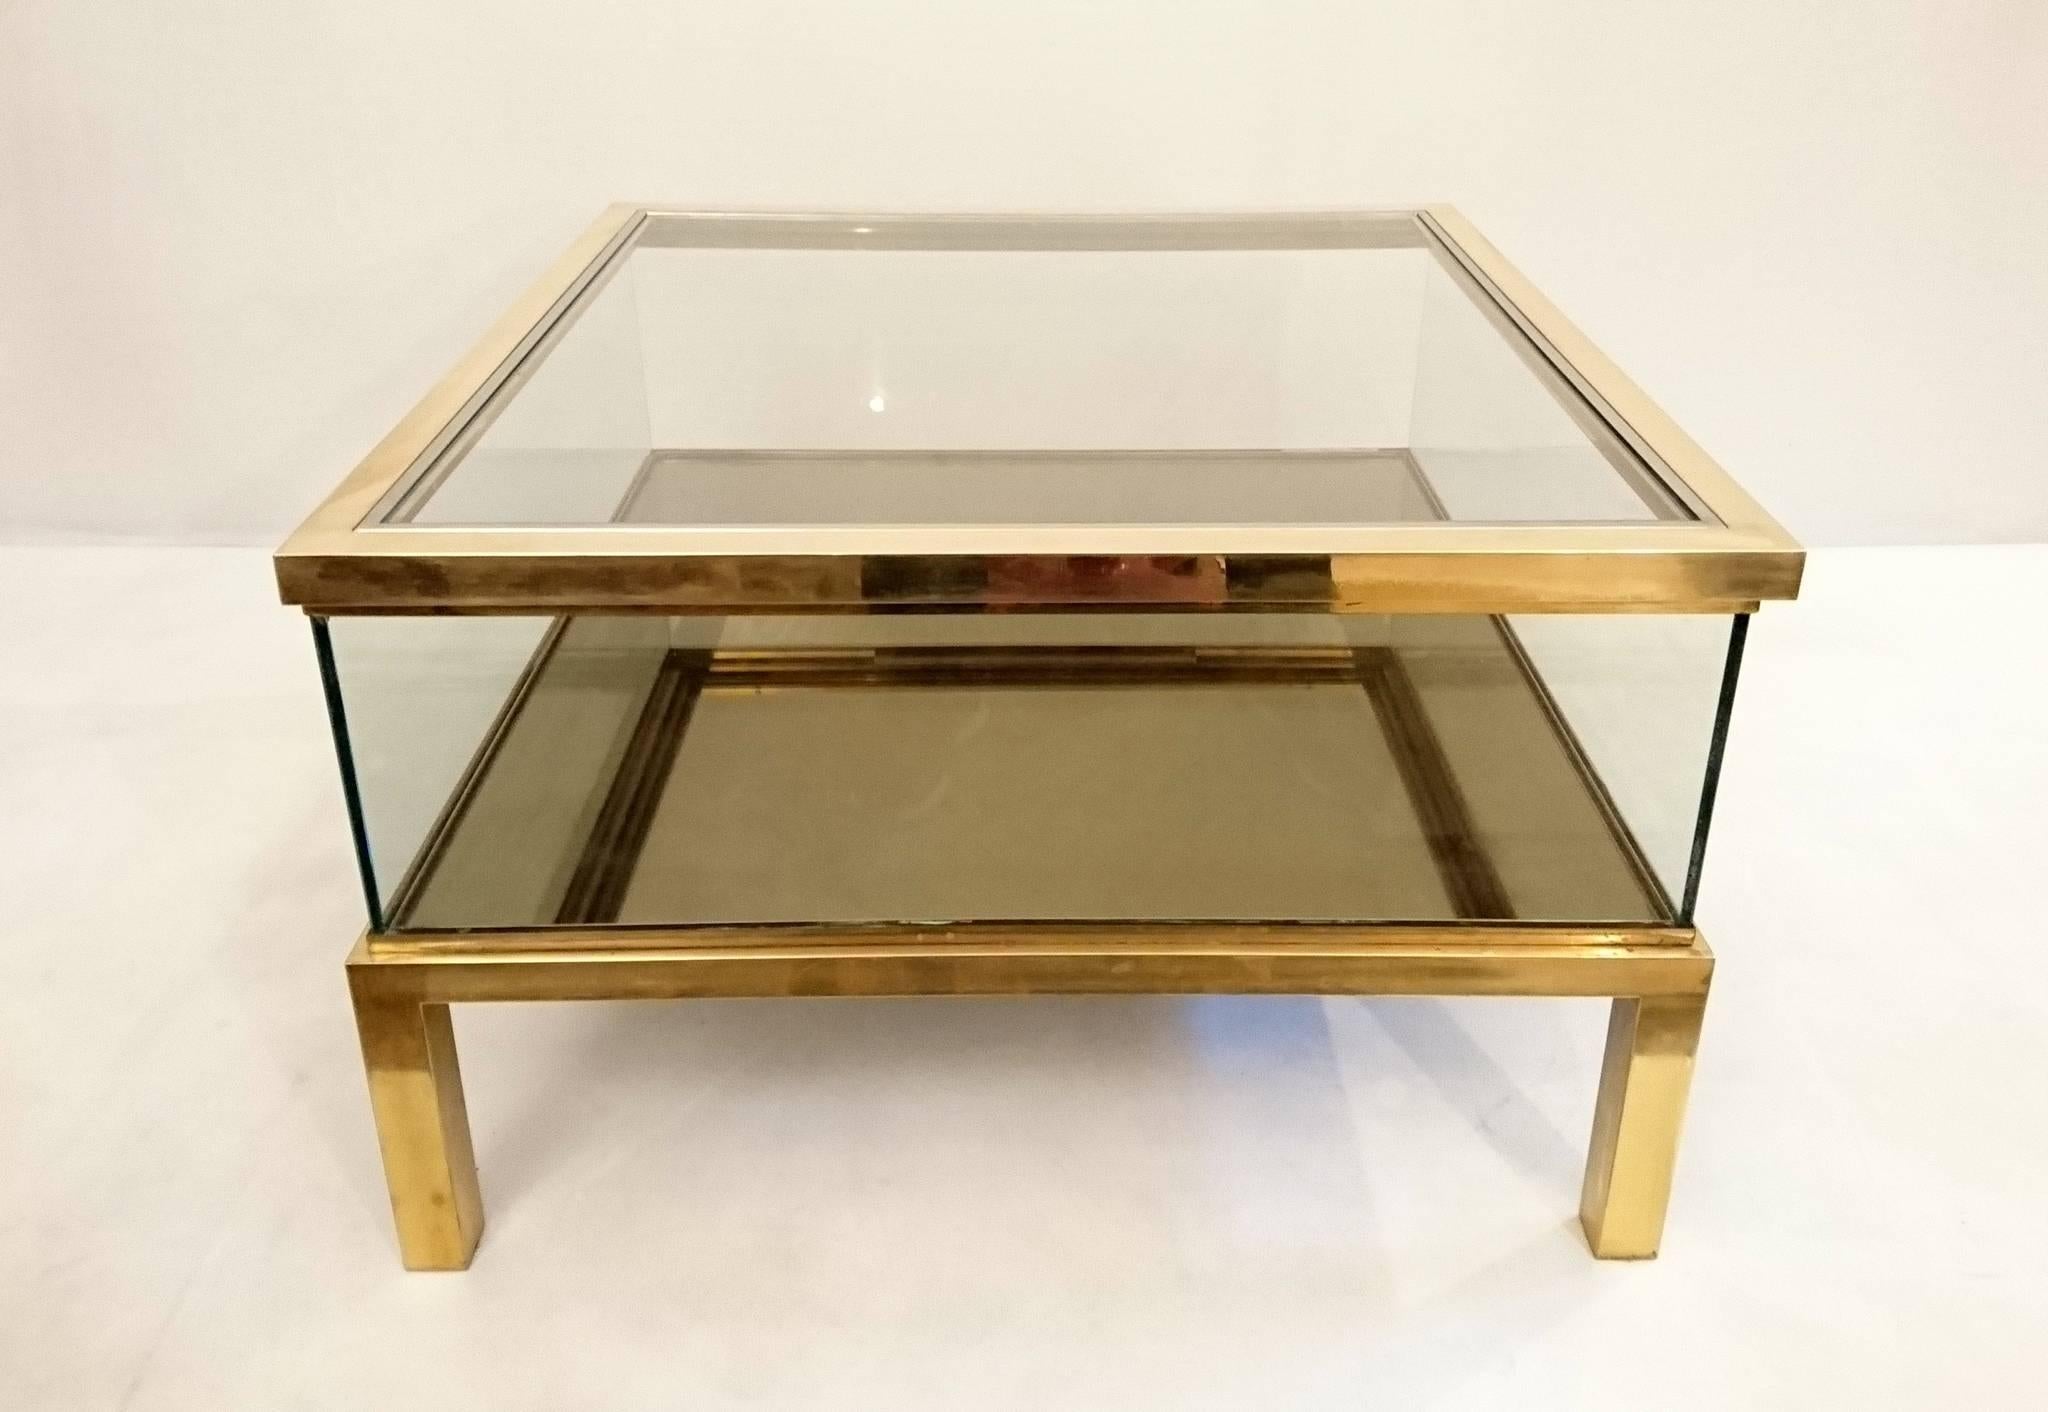 Italian table with a sliding top in brass and chrome. Smoked mirror glass at the bottom of the table and clear glass sides and top. Excellent quality.